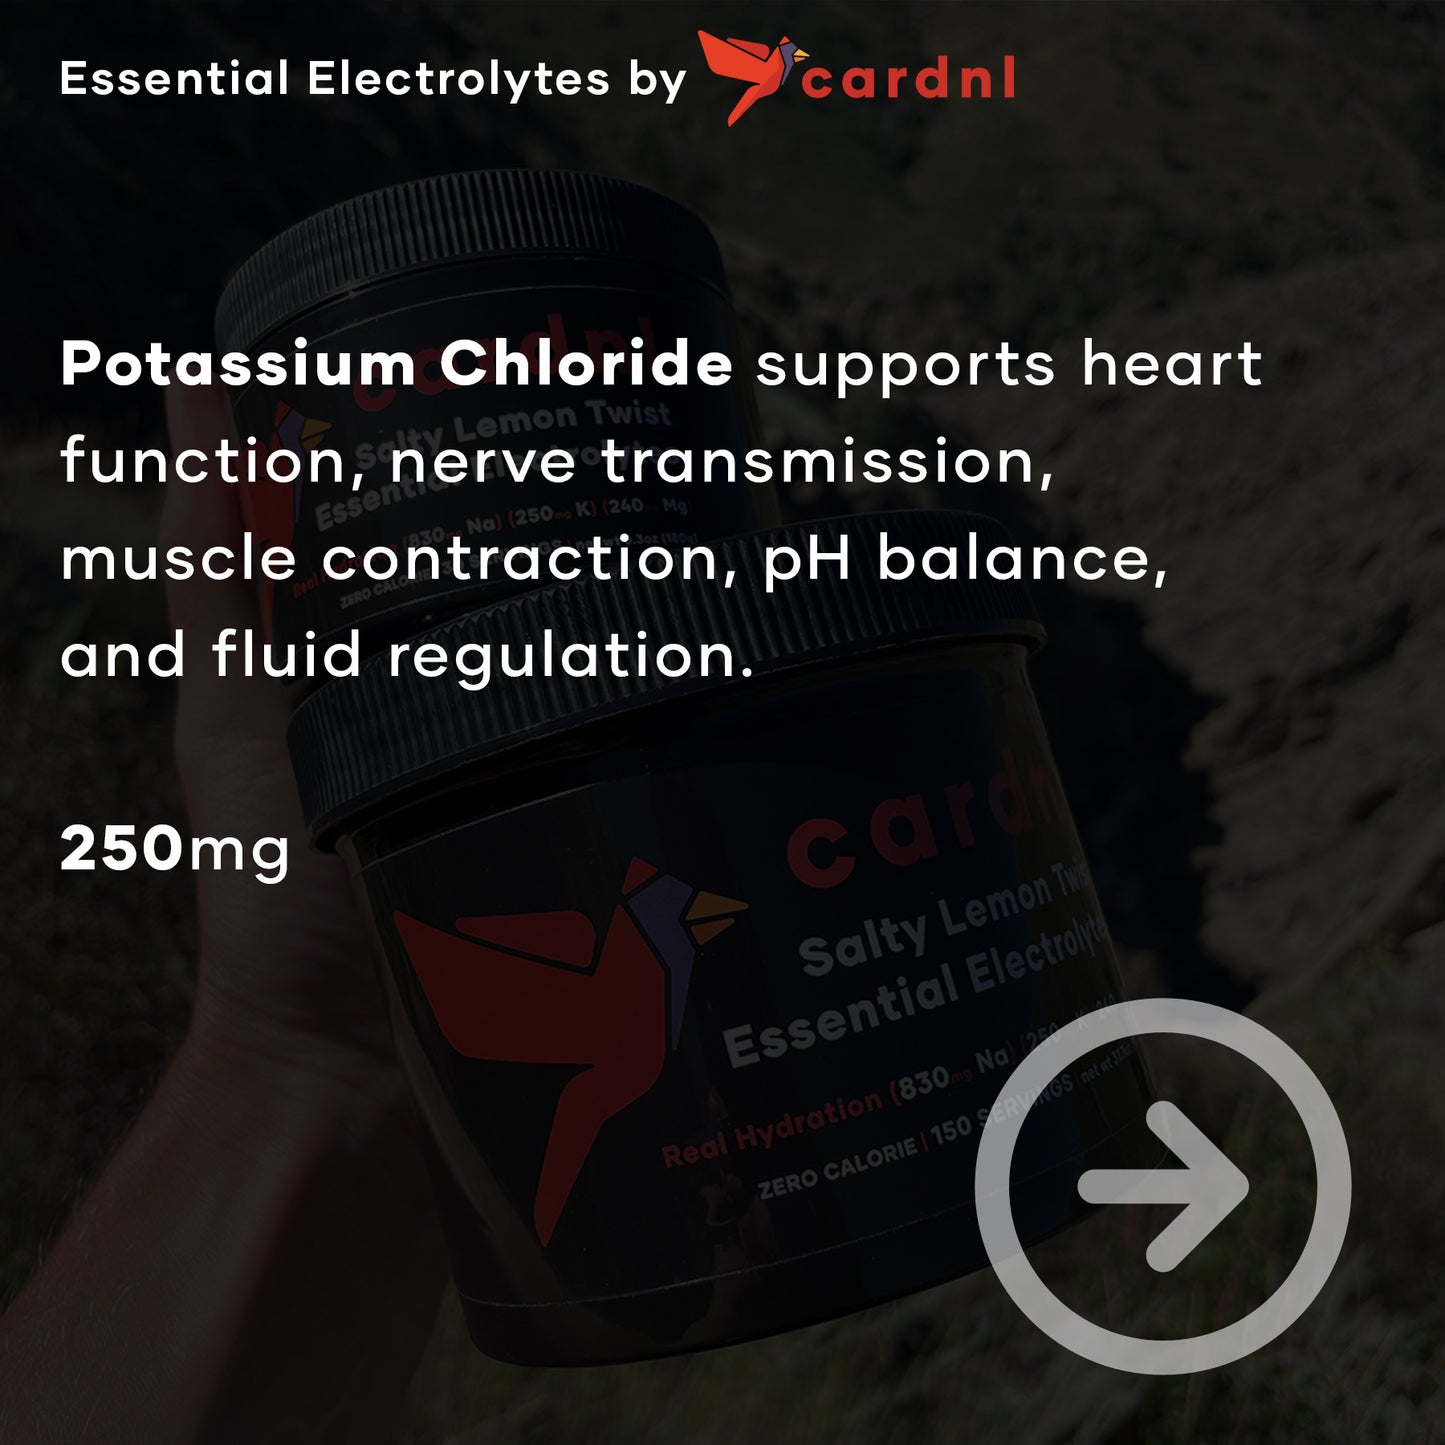 Potassium Chloride supports heart function, nerve transmission, muscle contraction, pH balance, and fluid regulation.